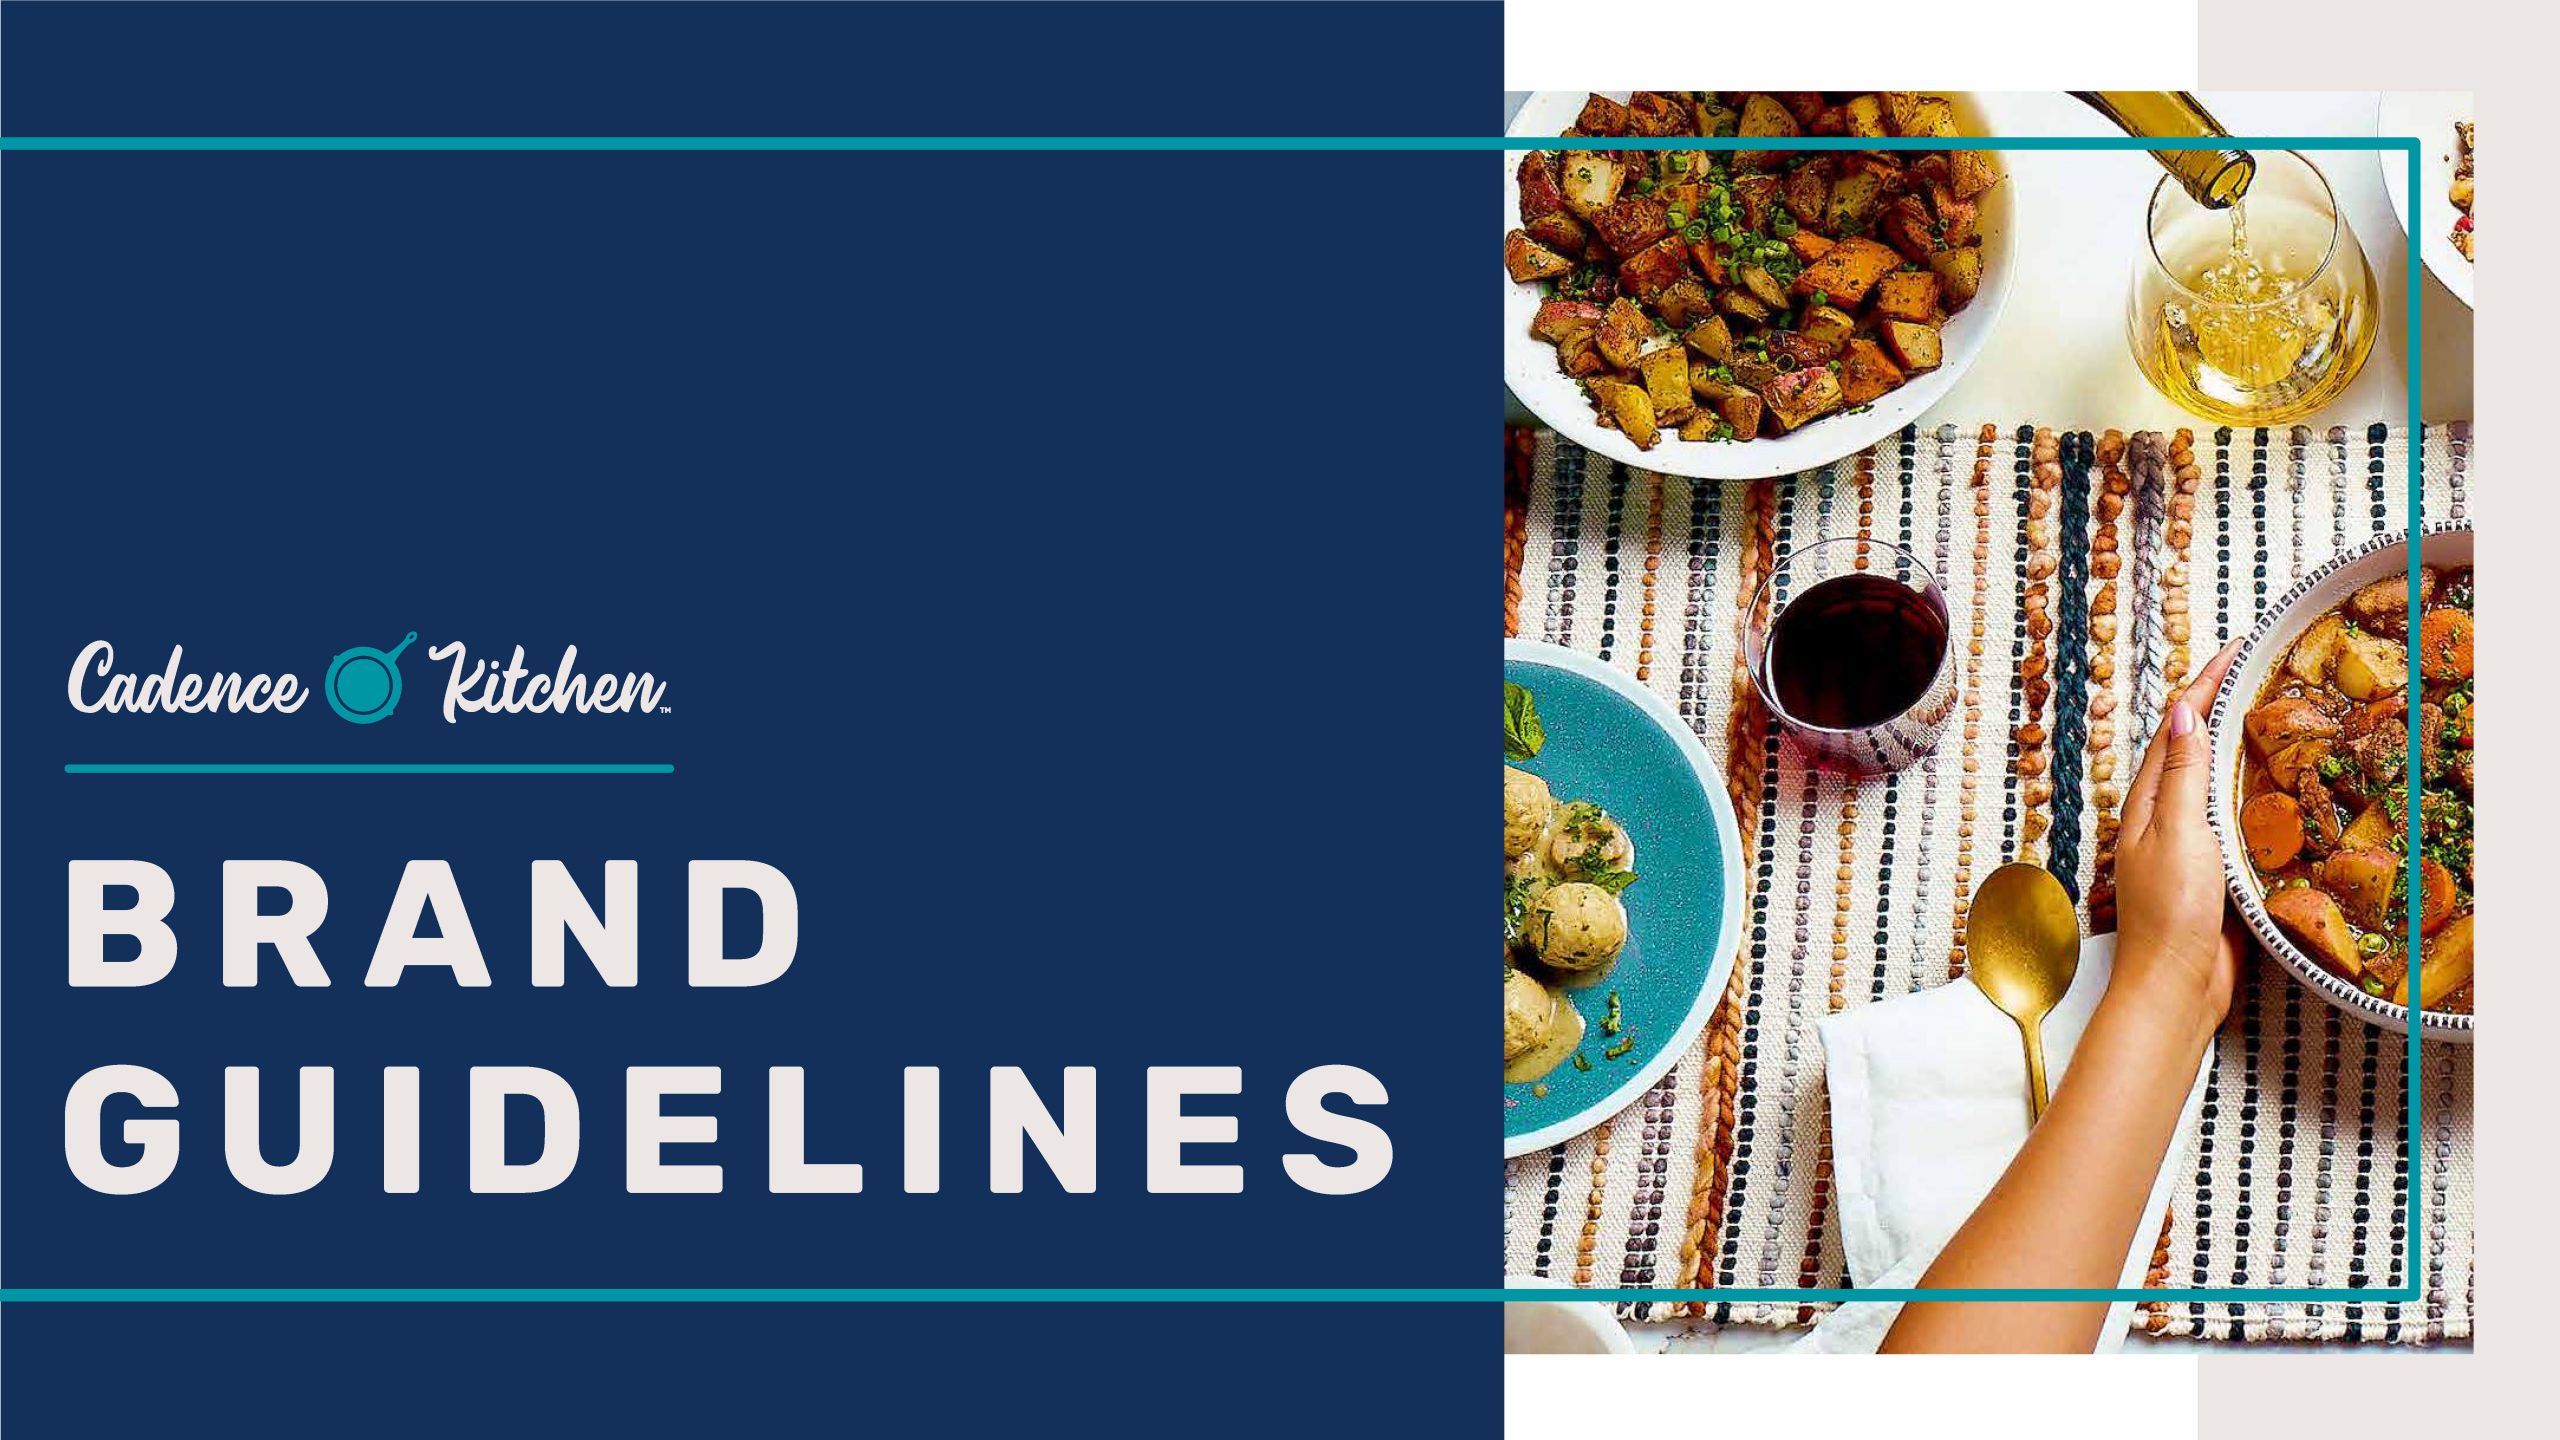 Cadence Kitchen Brand Guidelines